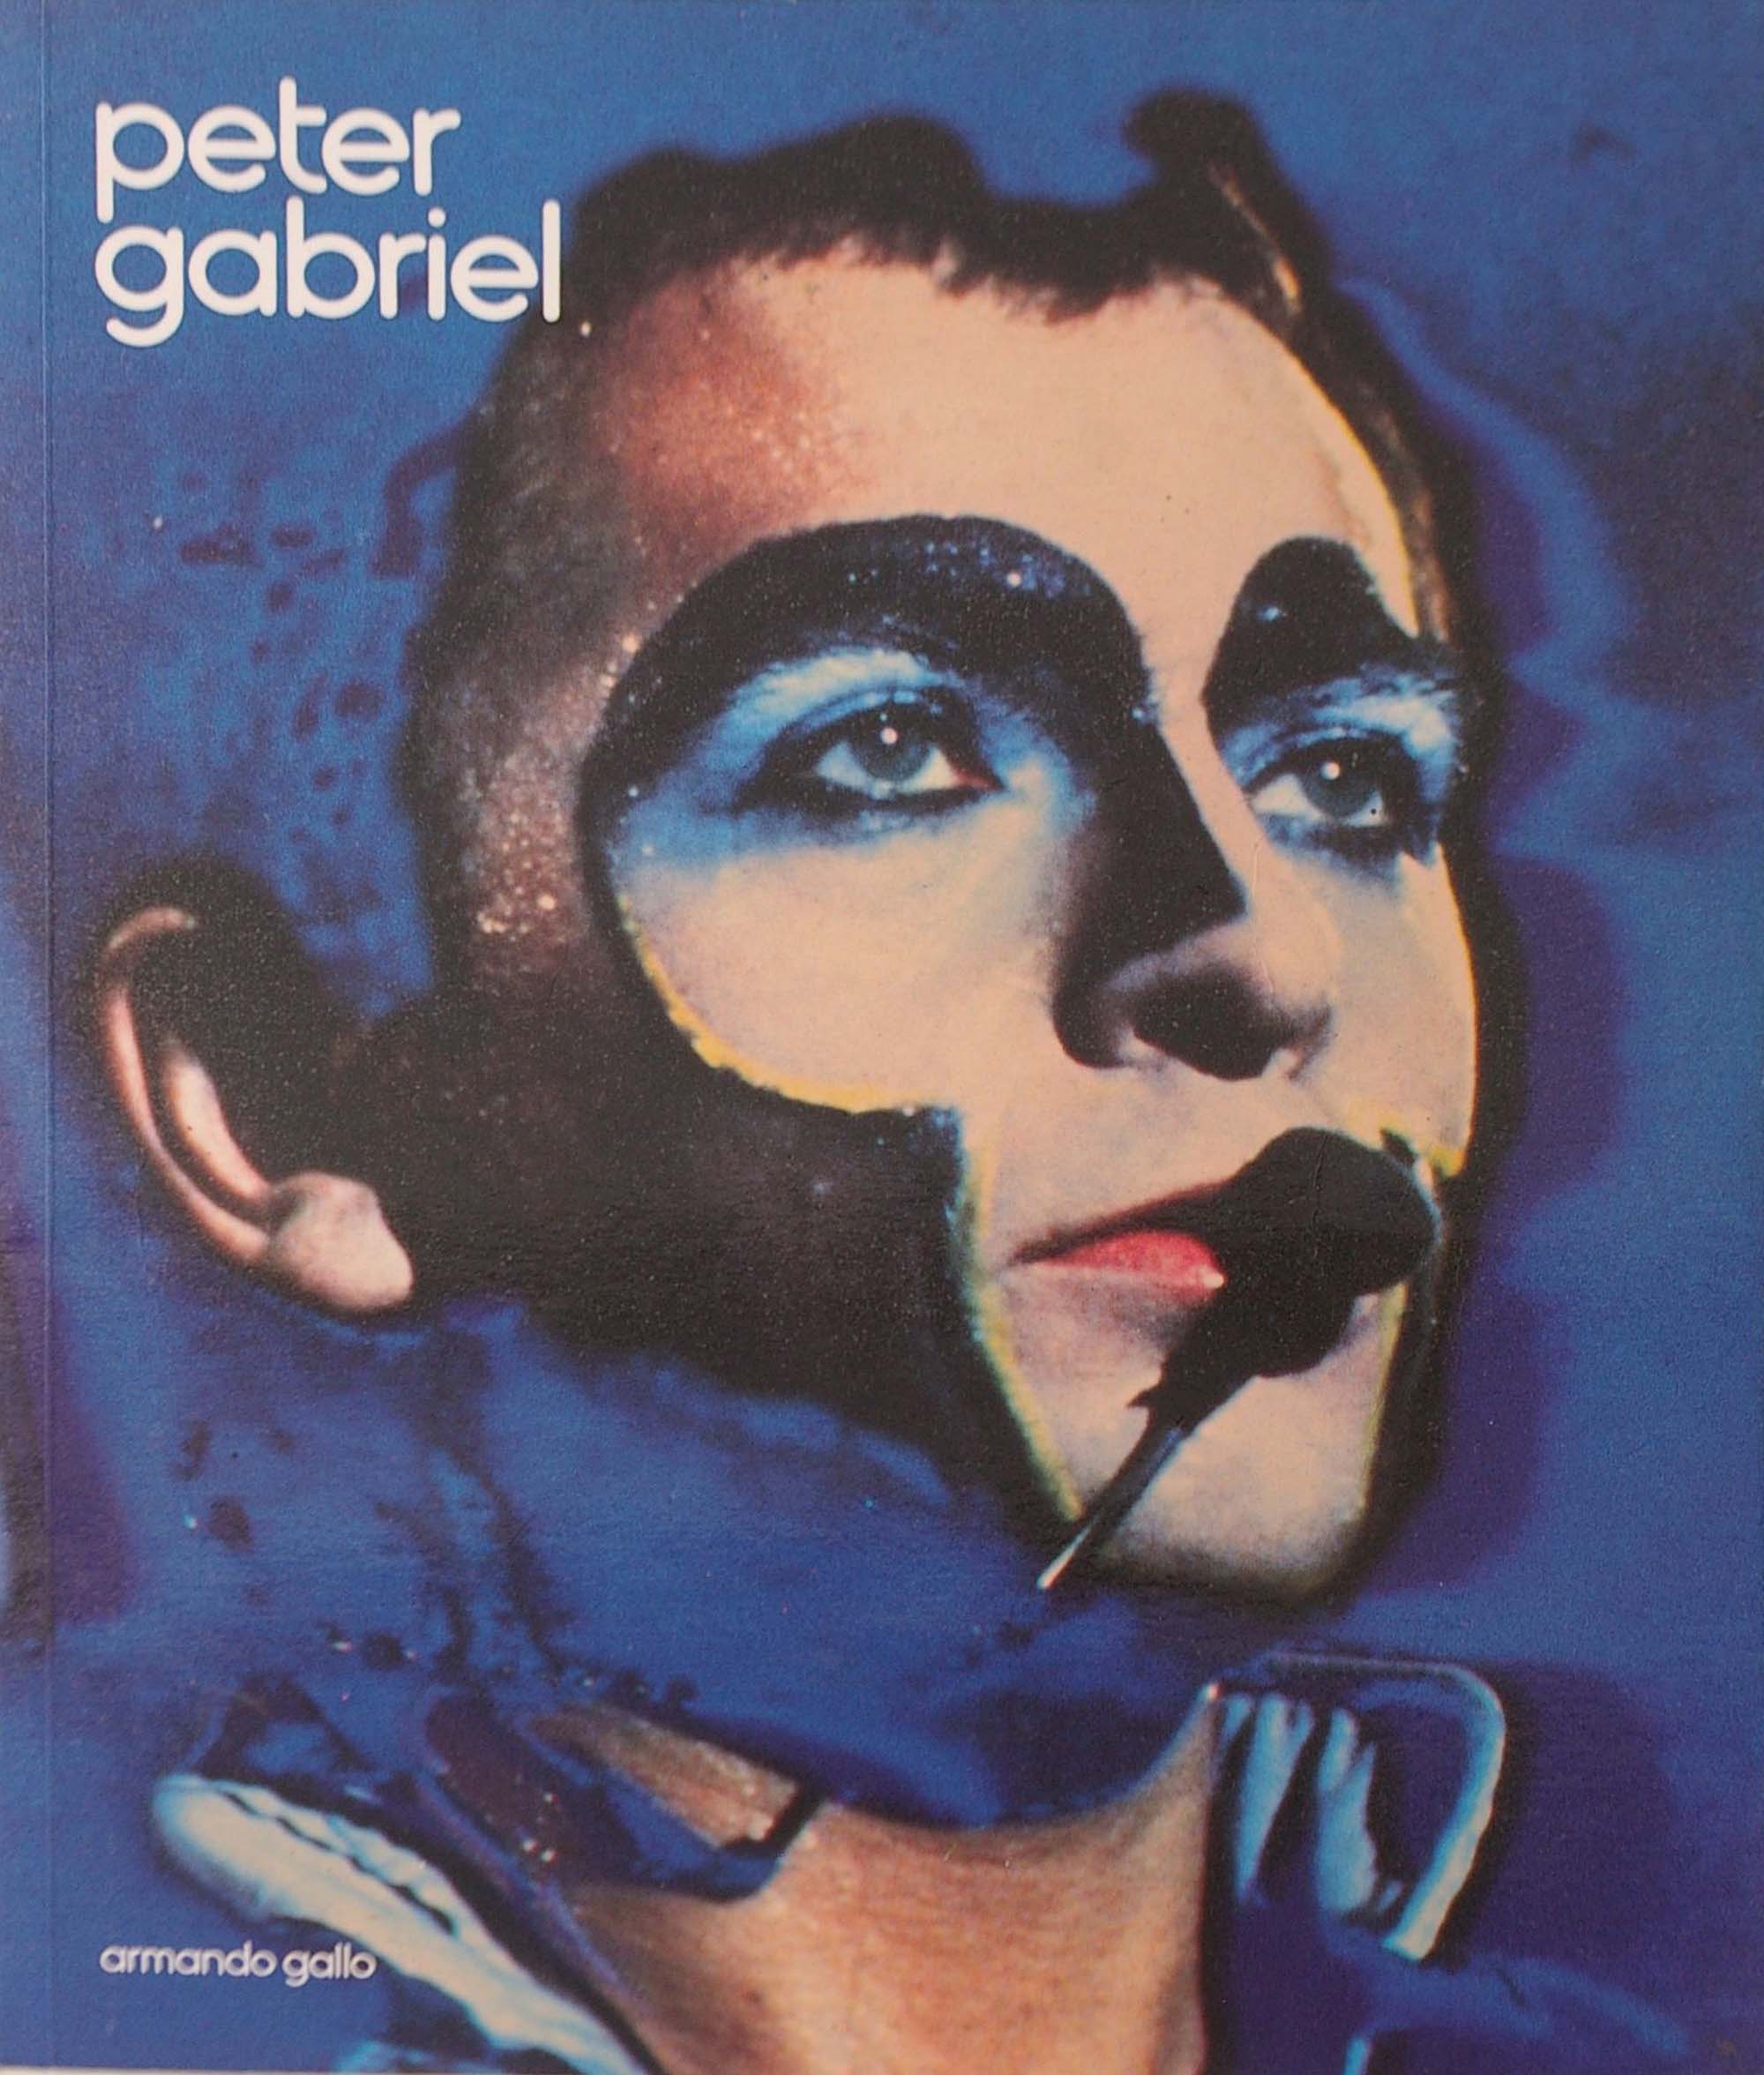 A quantity of biographies and documentary books about bands of the 1980's and 90's. Peter Gabriel by